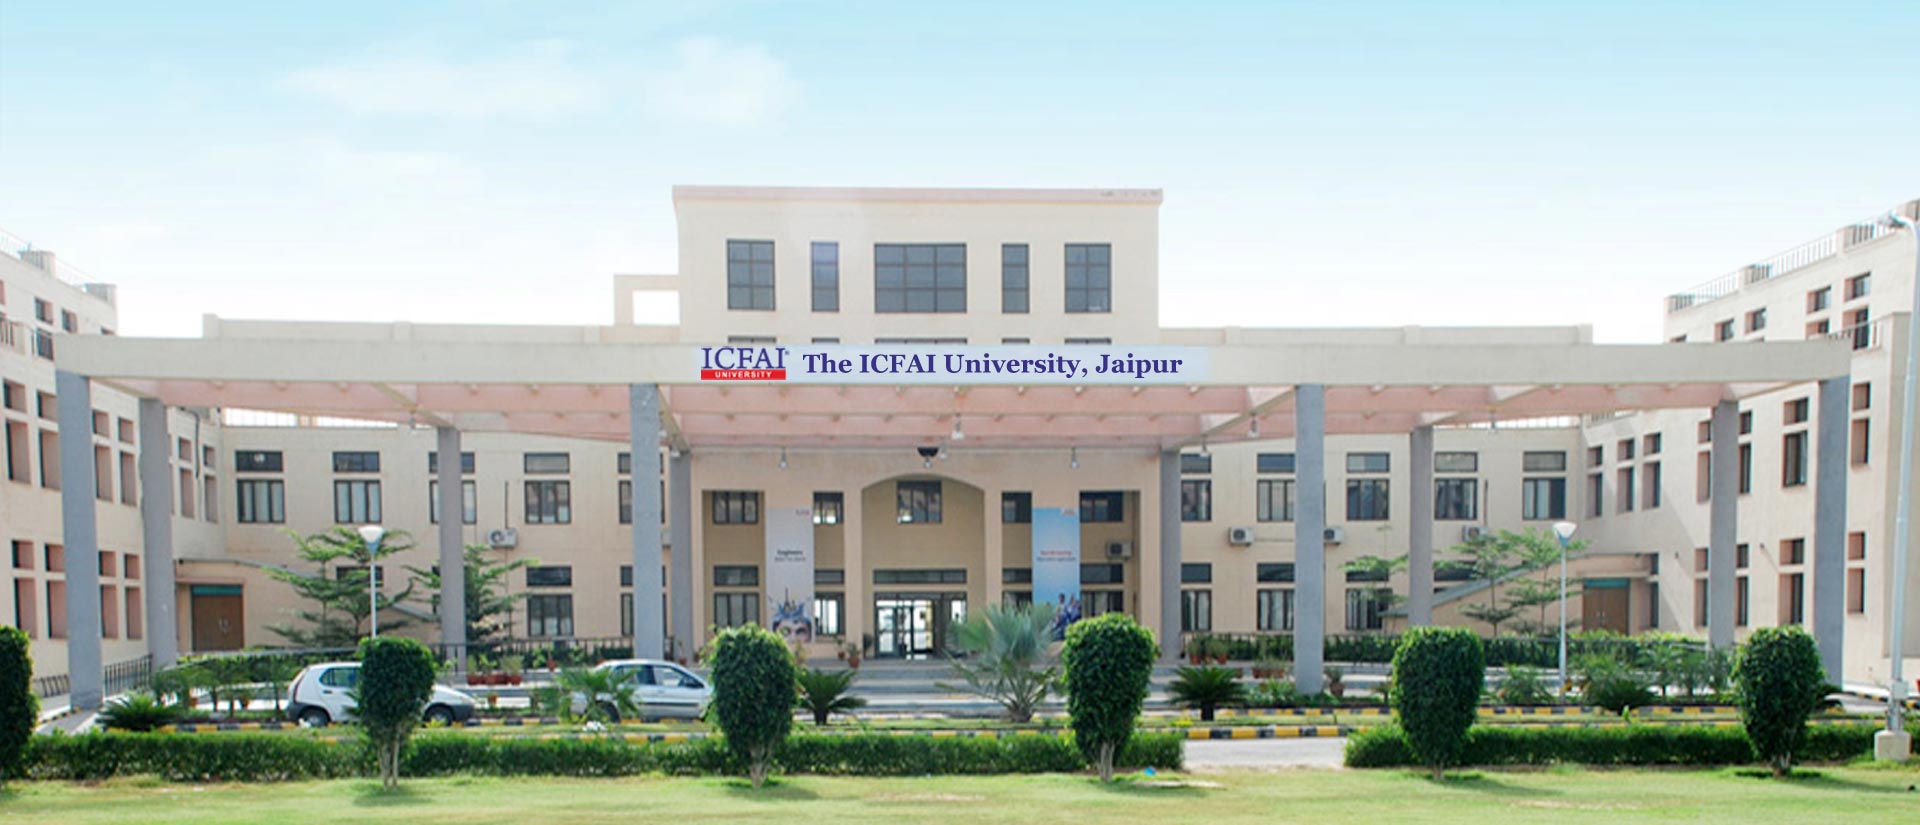 ICFAI Business School Jaipur Hiring Faculty Posts for Multiple Departments